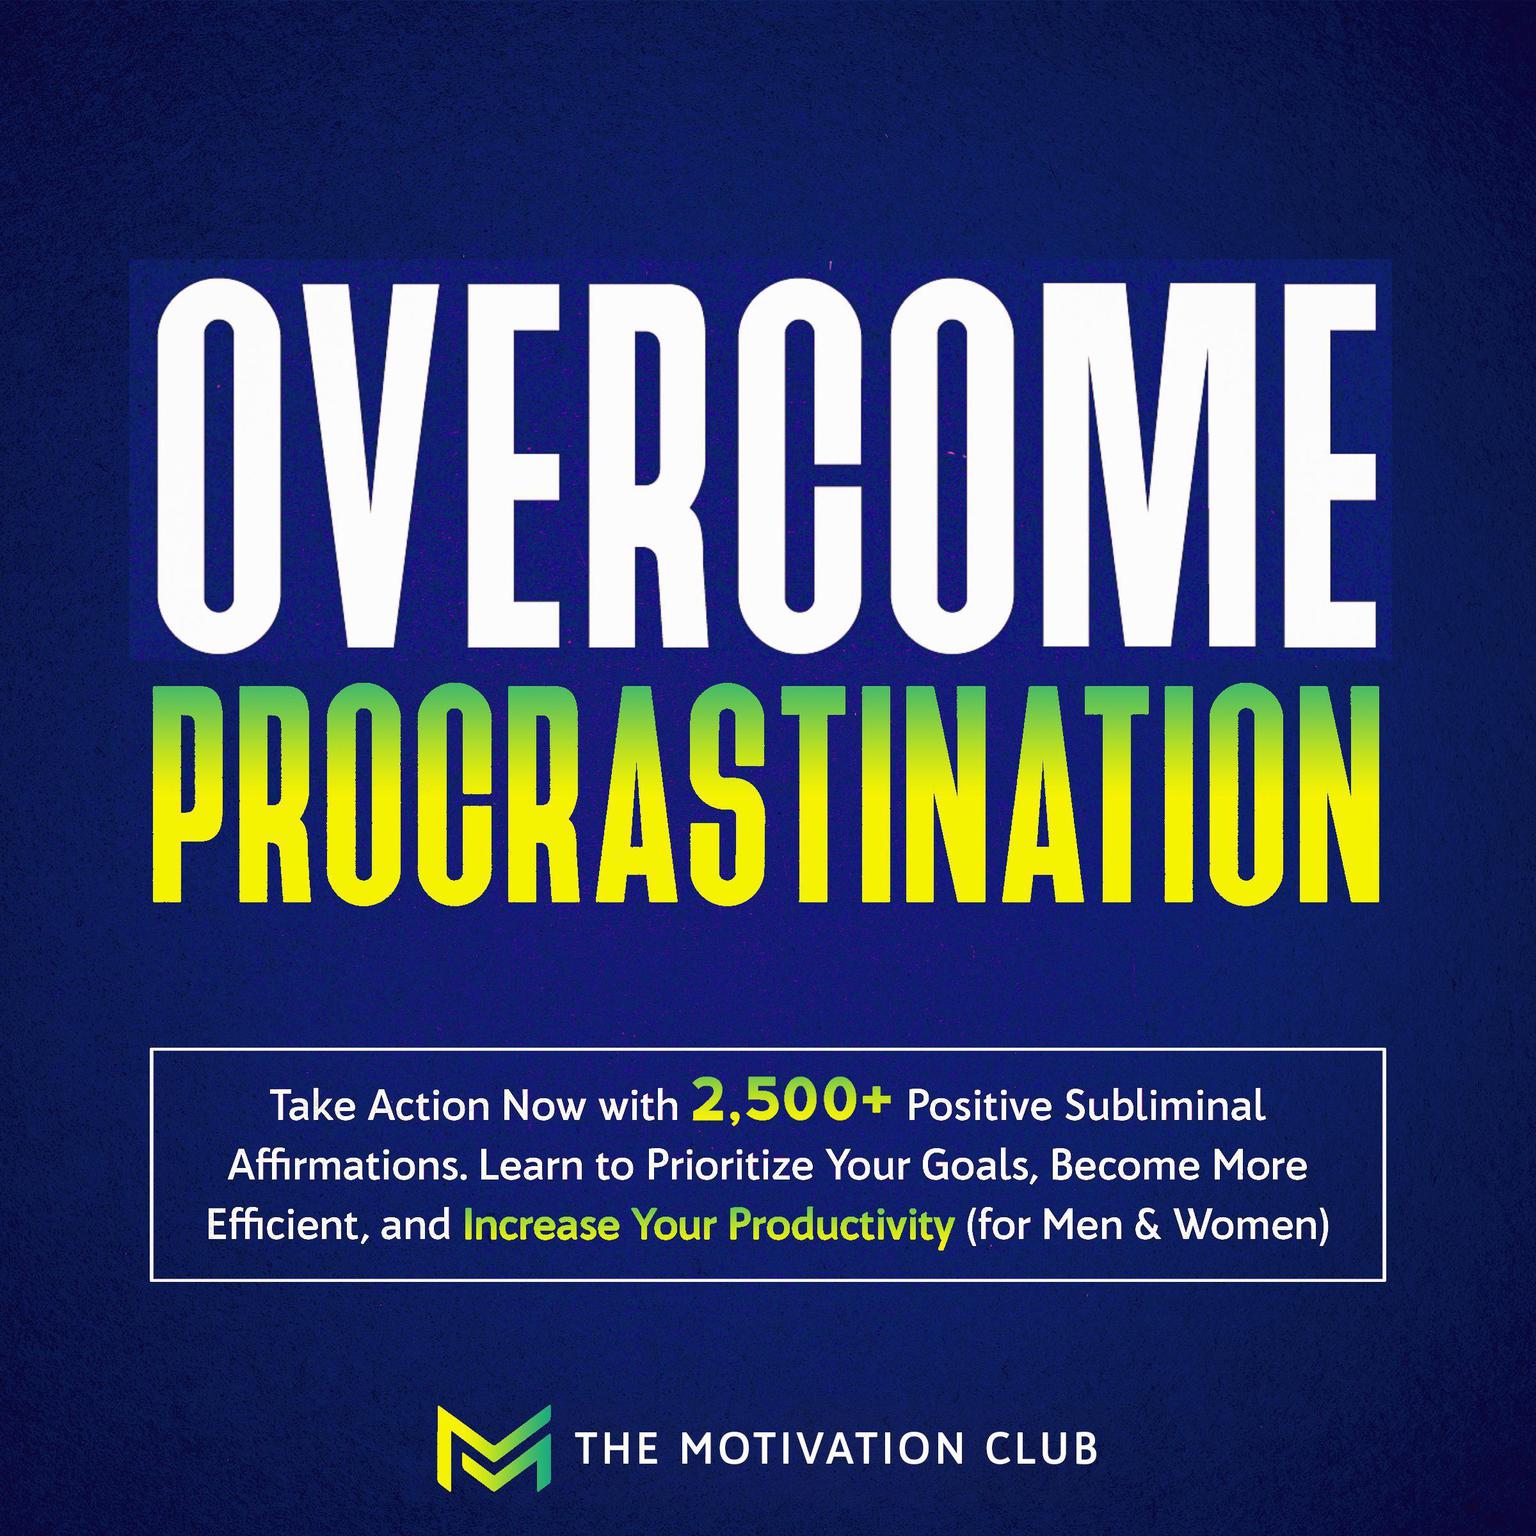 Overcome Procrastination: Take Action Now with 2,500+ Positive Subliminal Affirmations Learn to Prioritize Your Goals, Become More Efficient, and Increase Your Productivity (for Men & Women) Audiobook, by The Motivation Club